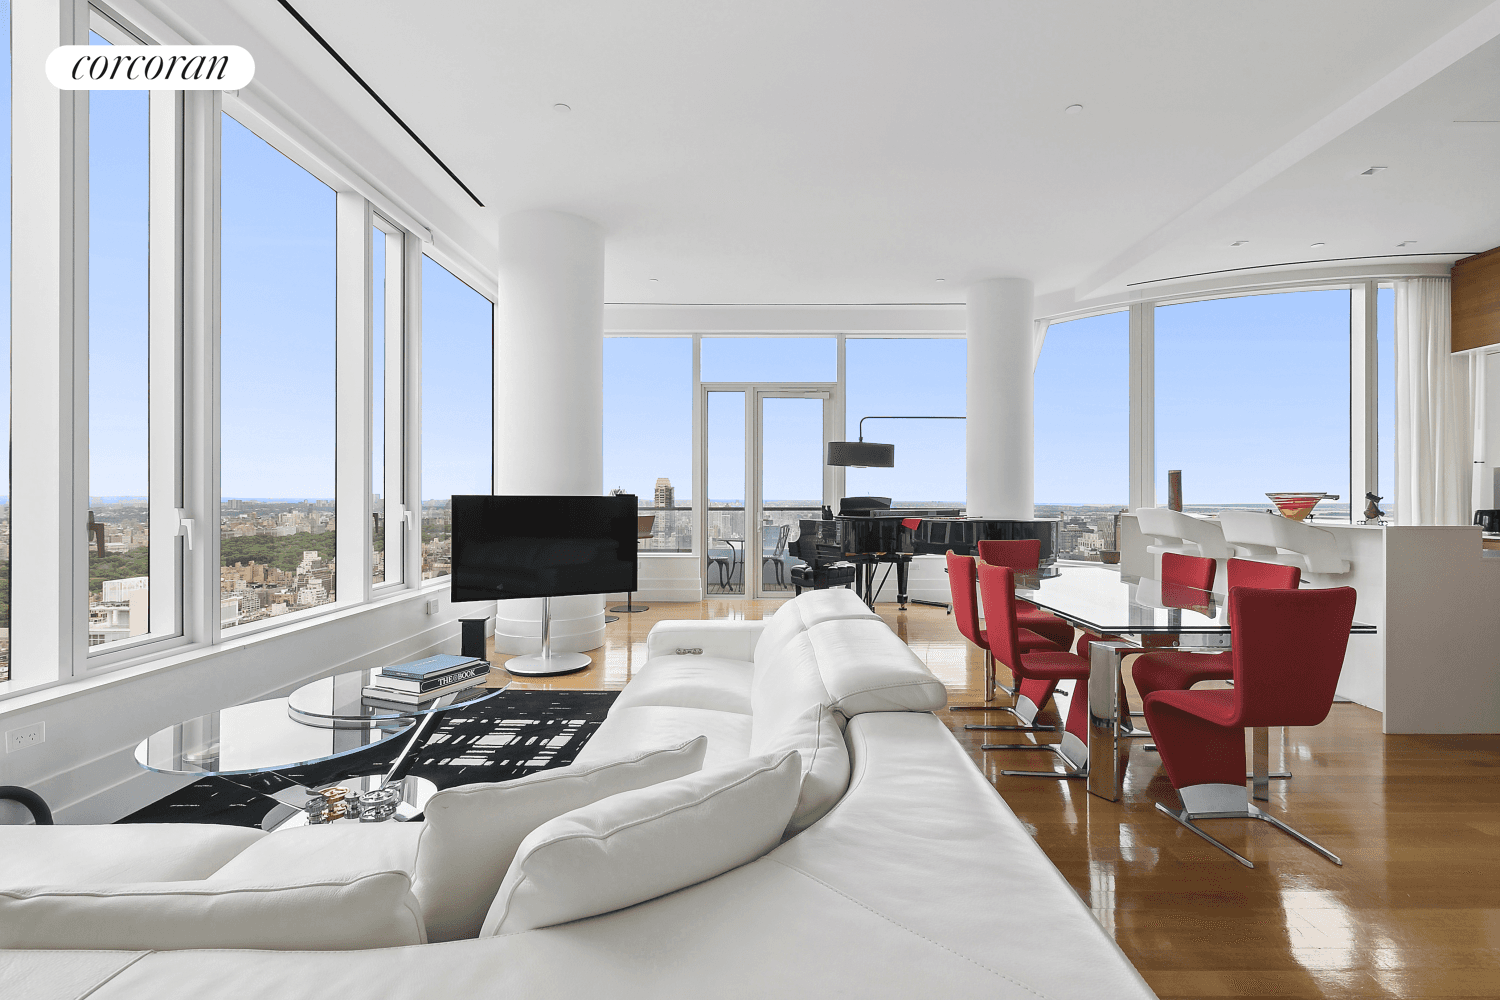 Welcome to this spectacular corner home with expansive views in every direction including Central Park, the East River the NYC Skyline.